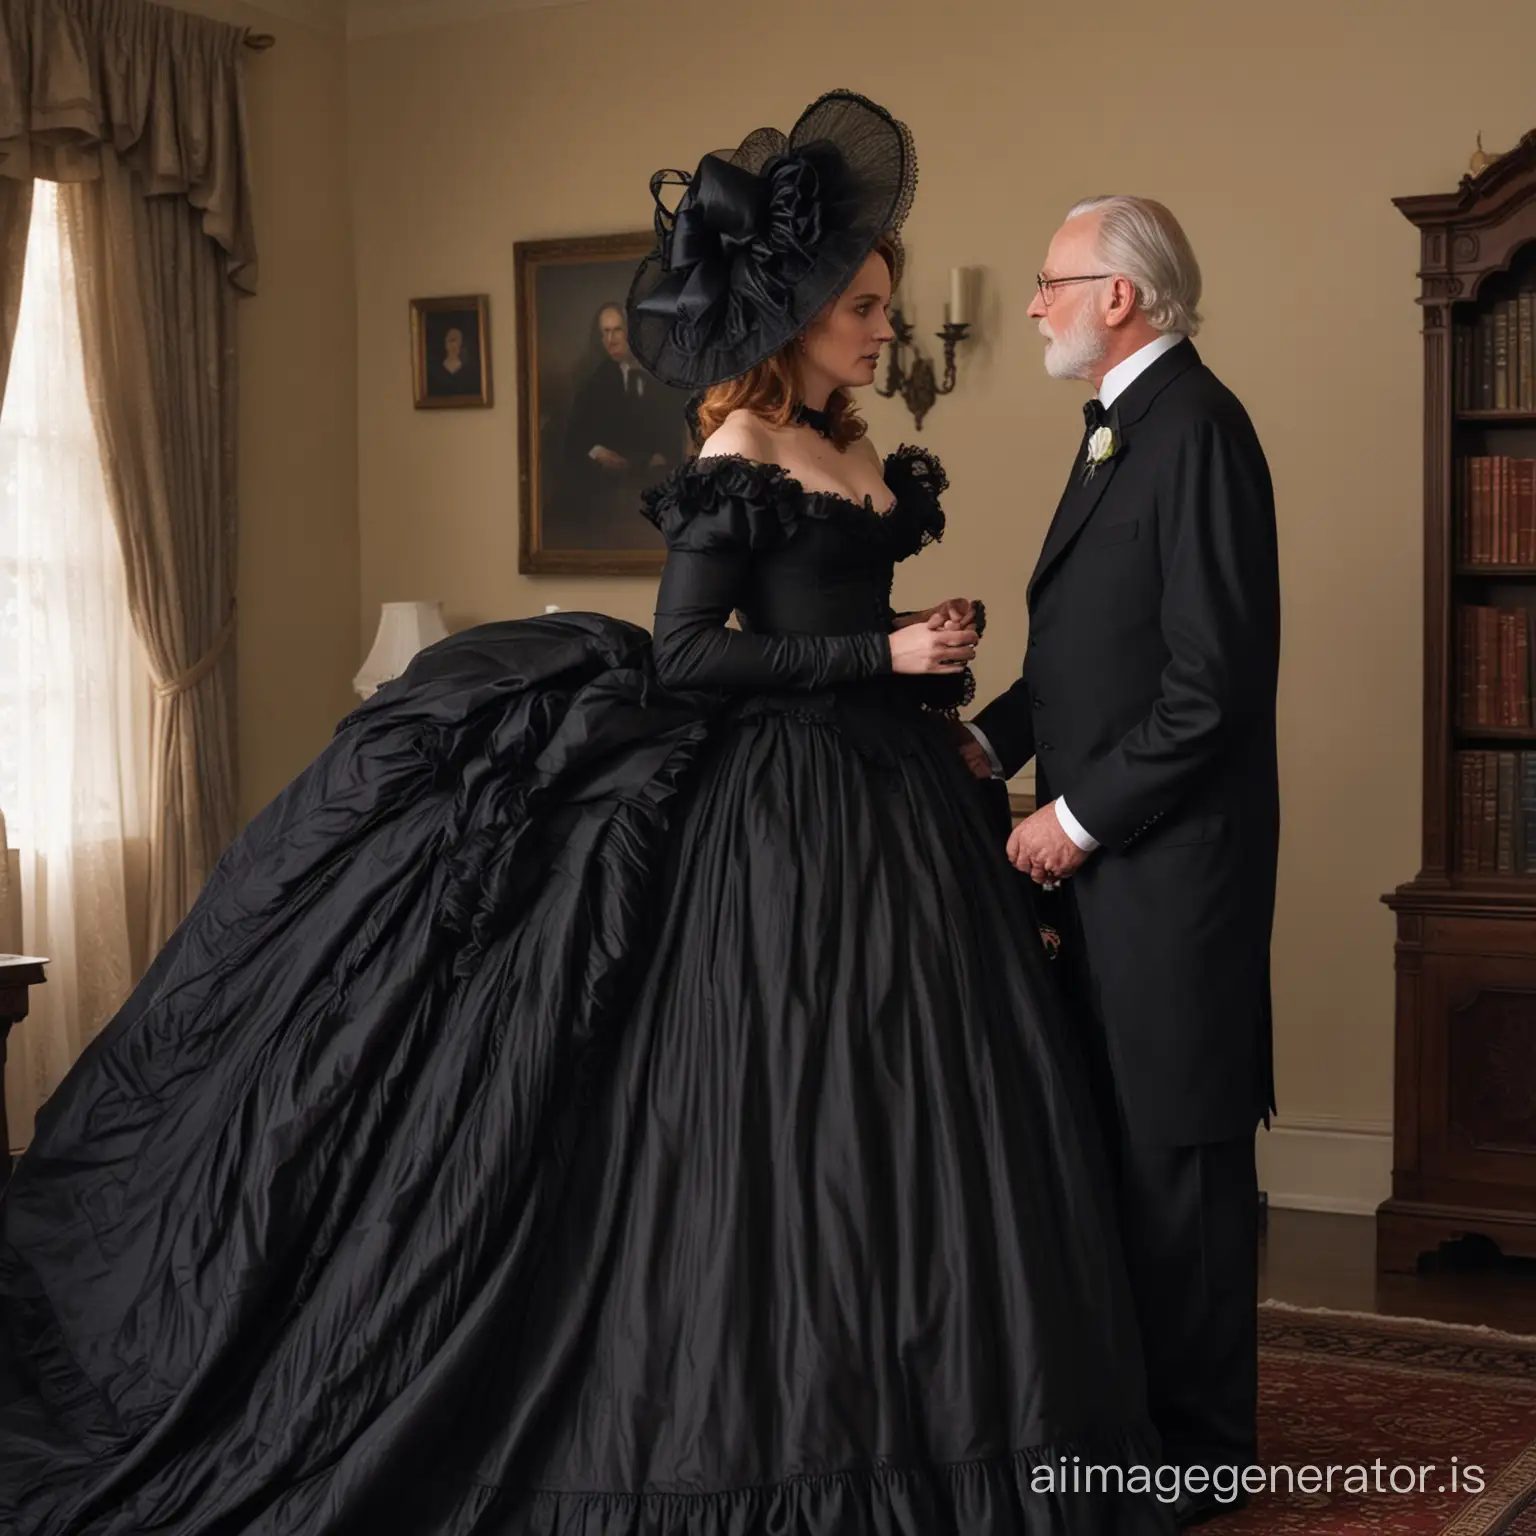 Dana Scully wearing a black floor-length loose billowing 1860 Victorian crinoline dress with a frilly bonnet kissing an old man who seems to be her newlywed husband